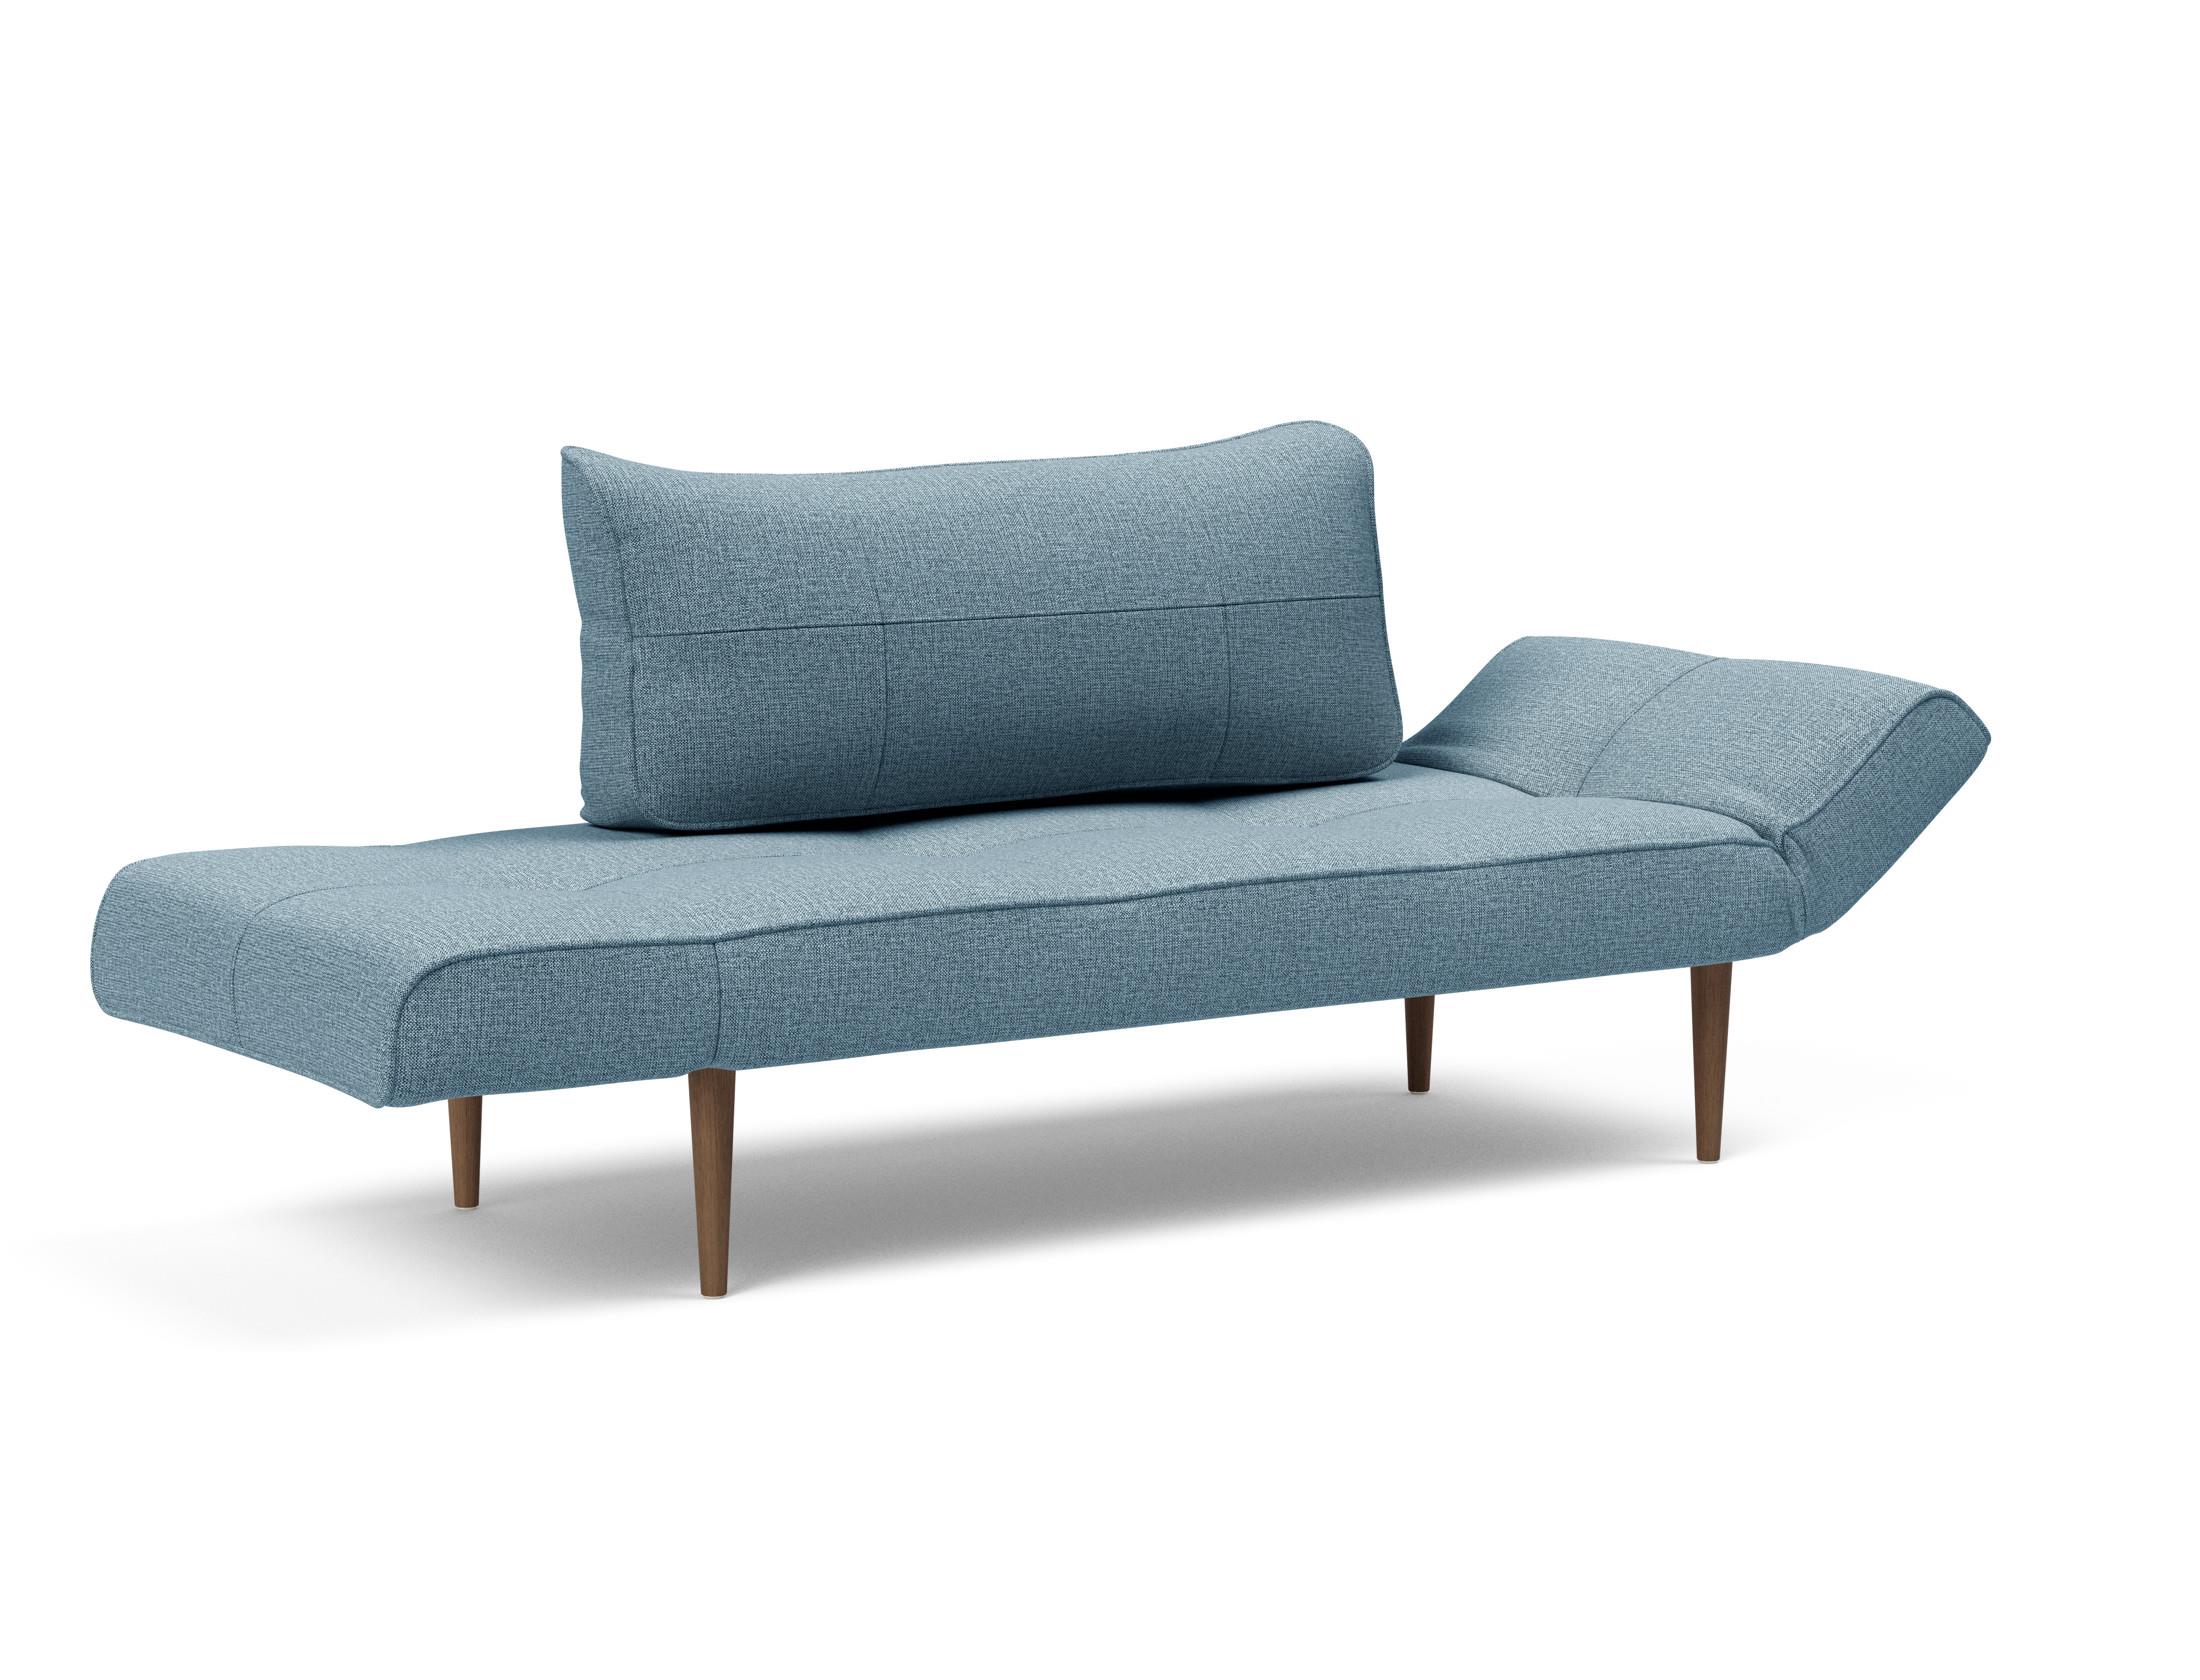 Zeal-Styletto-Daybed-525-p6-web